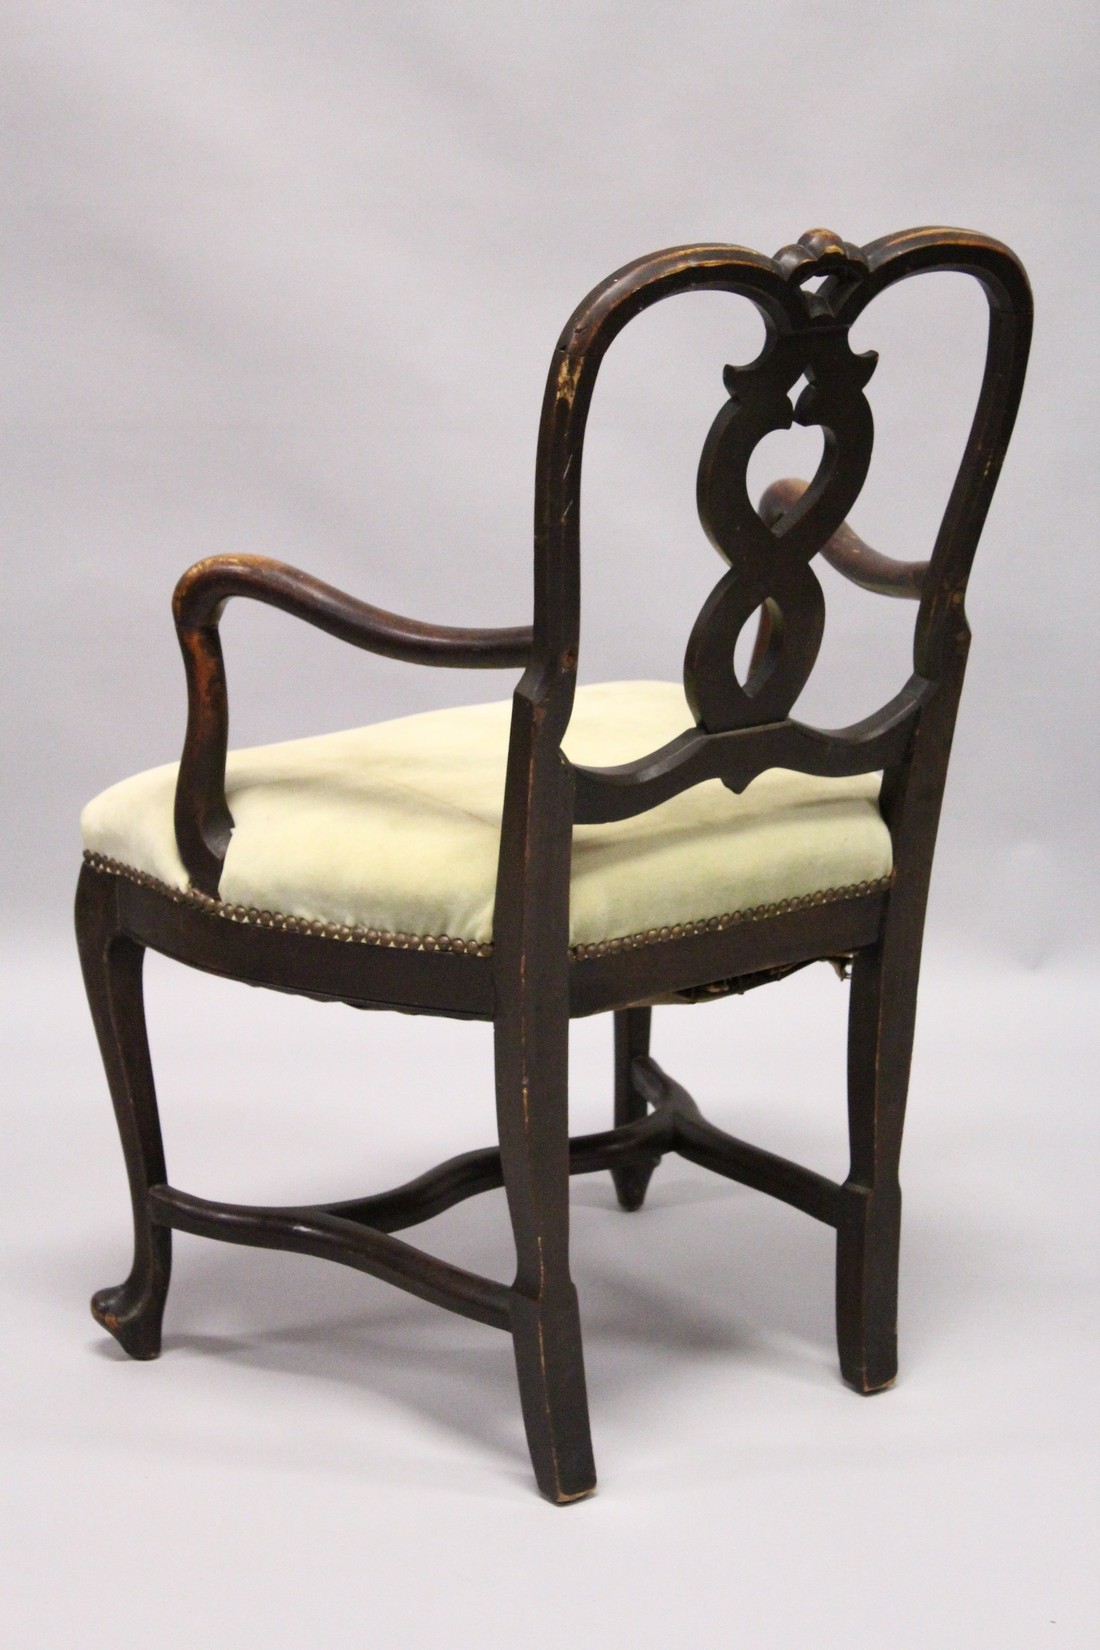 A SMALL GEORGE II DESIGN MAHOGANY OPEN ARMCHAIR with curved cresting, wavy splats, shepherd’s - Image 2 of 2